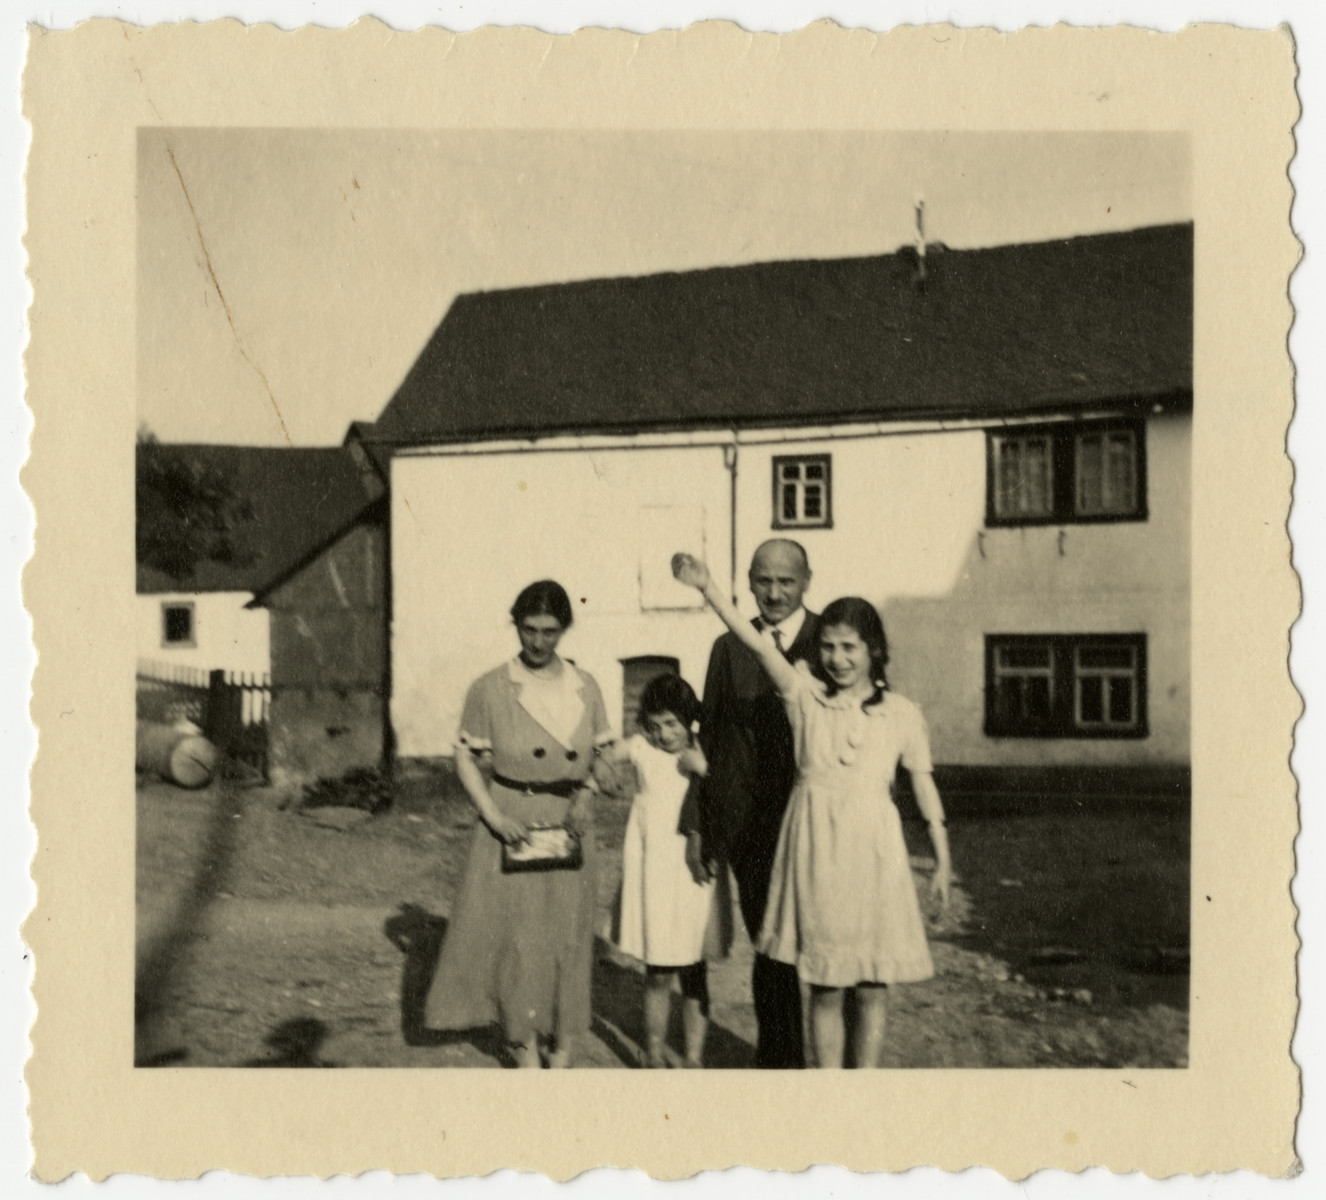 The Loeb family stands outside a warehouse in Halsenbach, Germany.

From left to right are Caroline, Hildegarde, Rudolf and Clare Loeb.